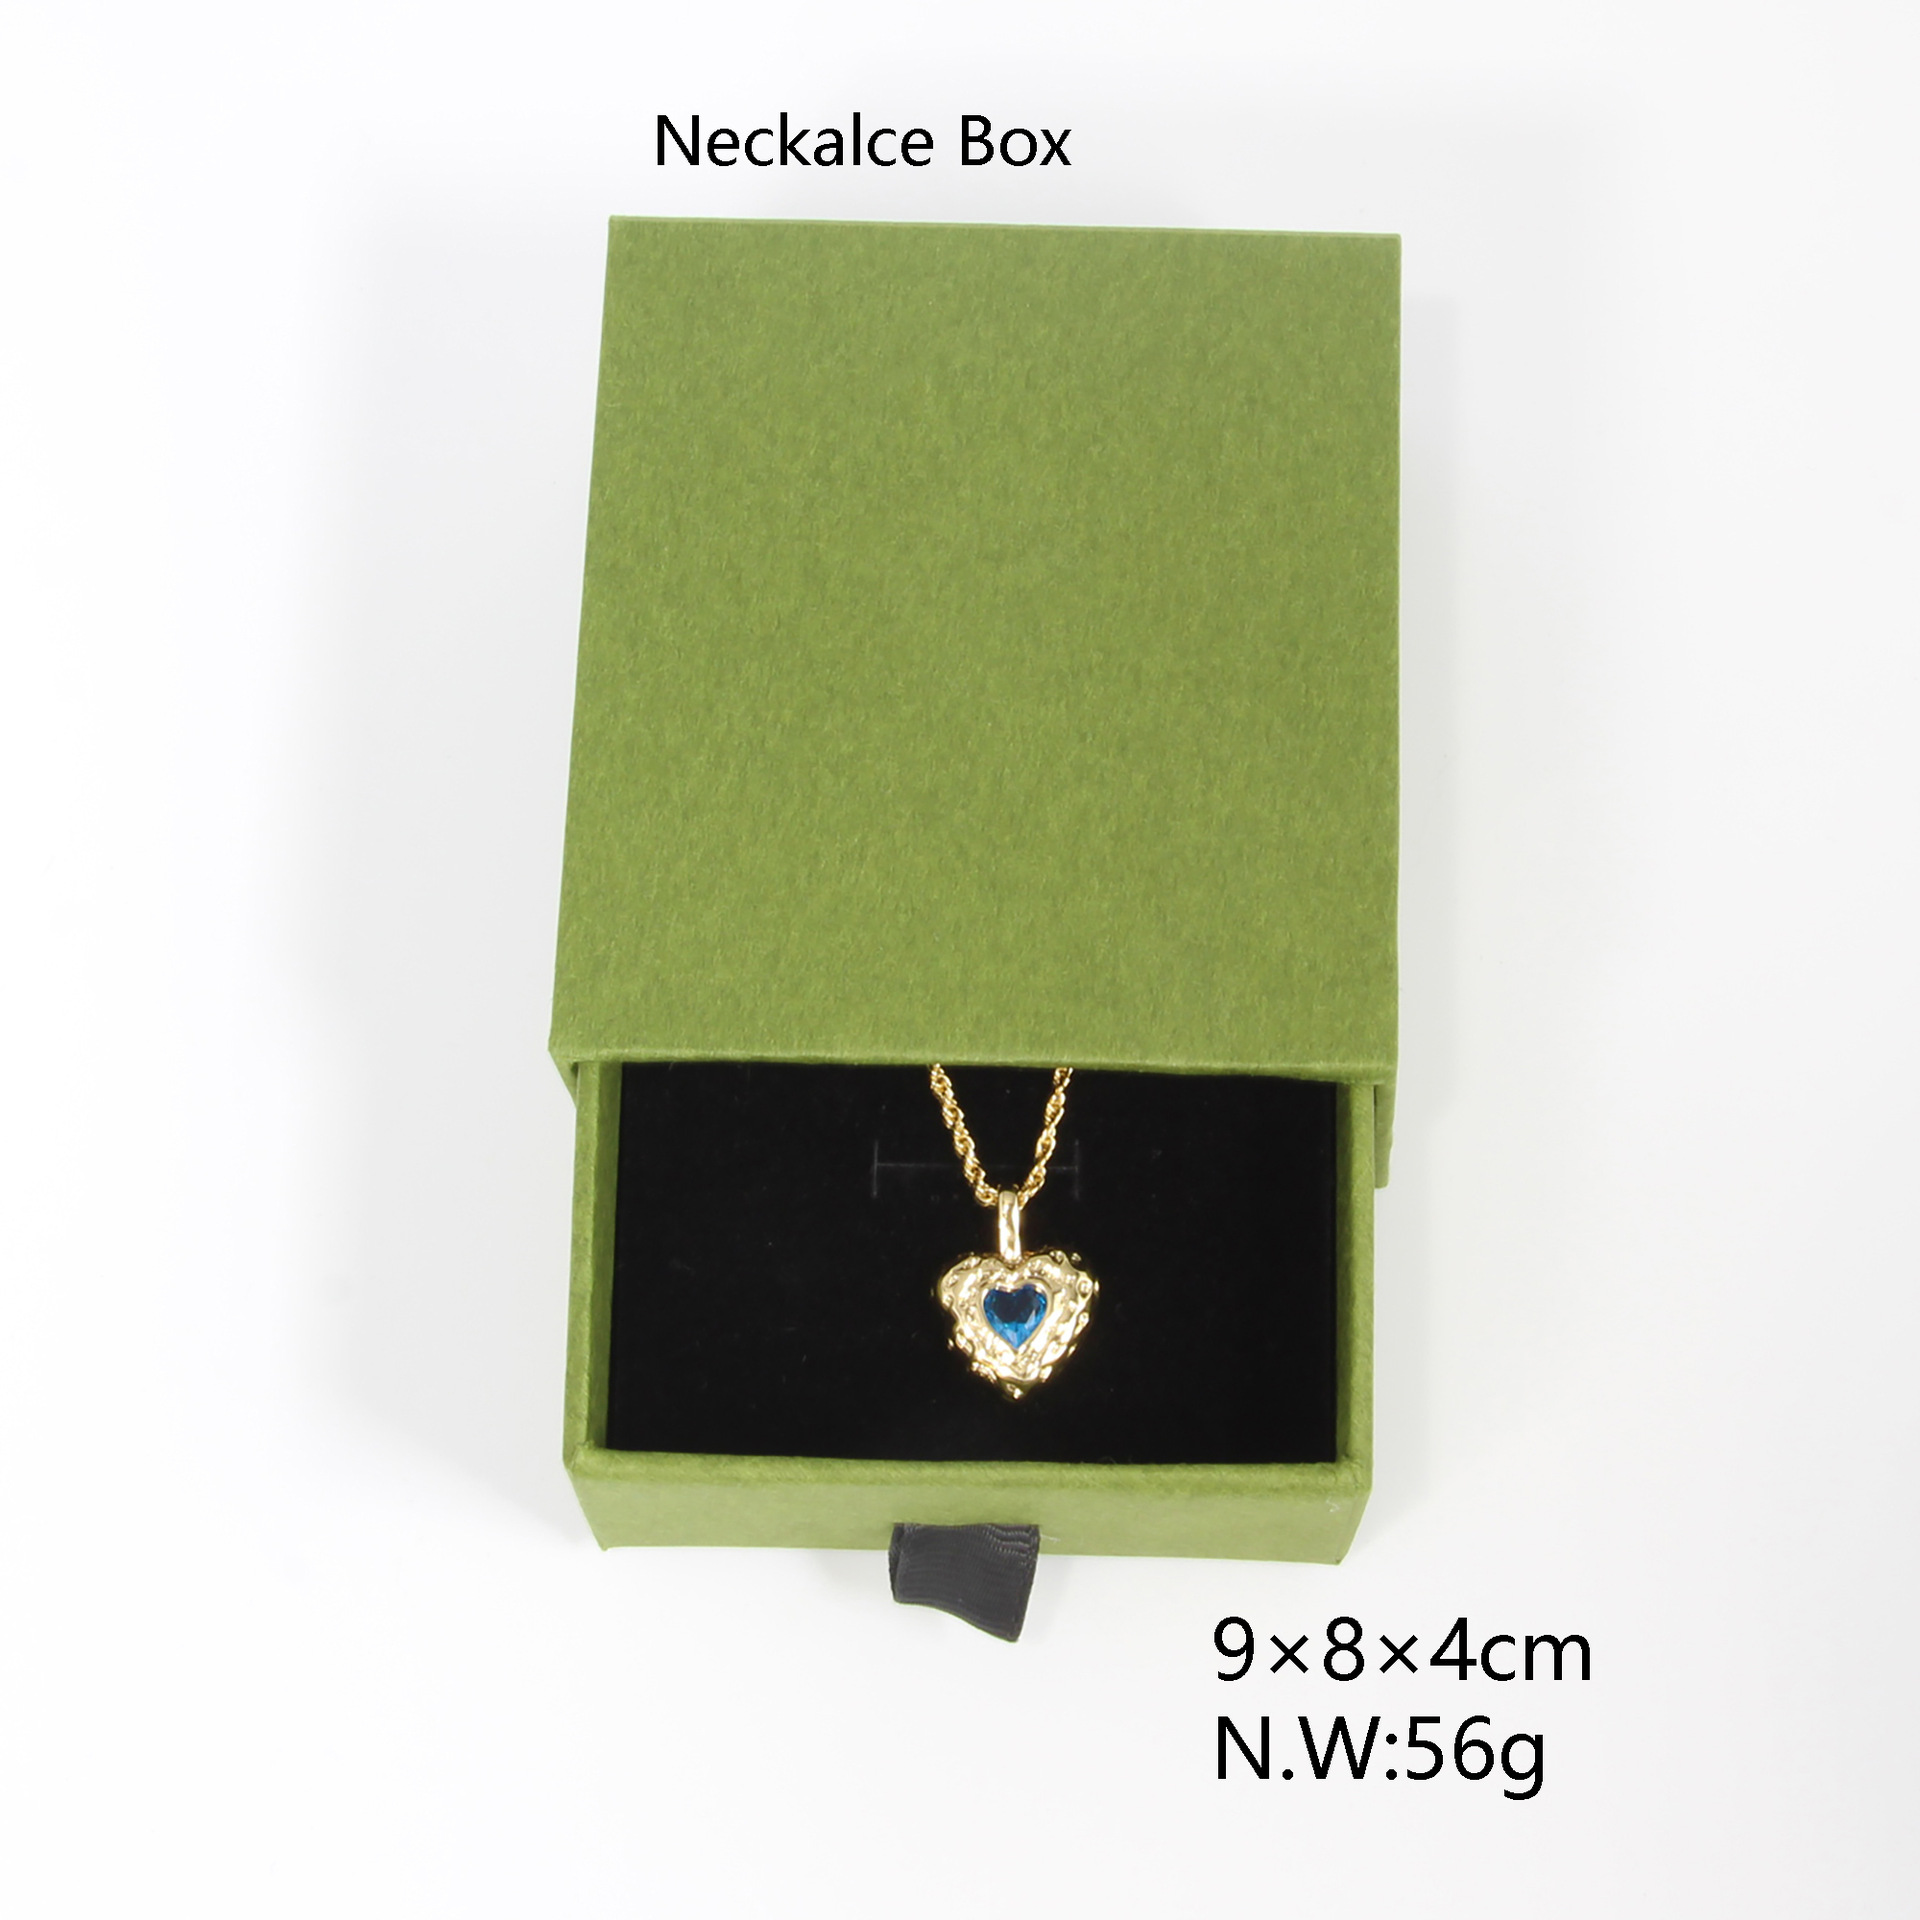 2 Necklace Box